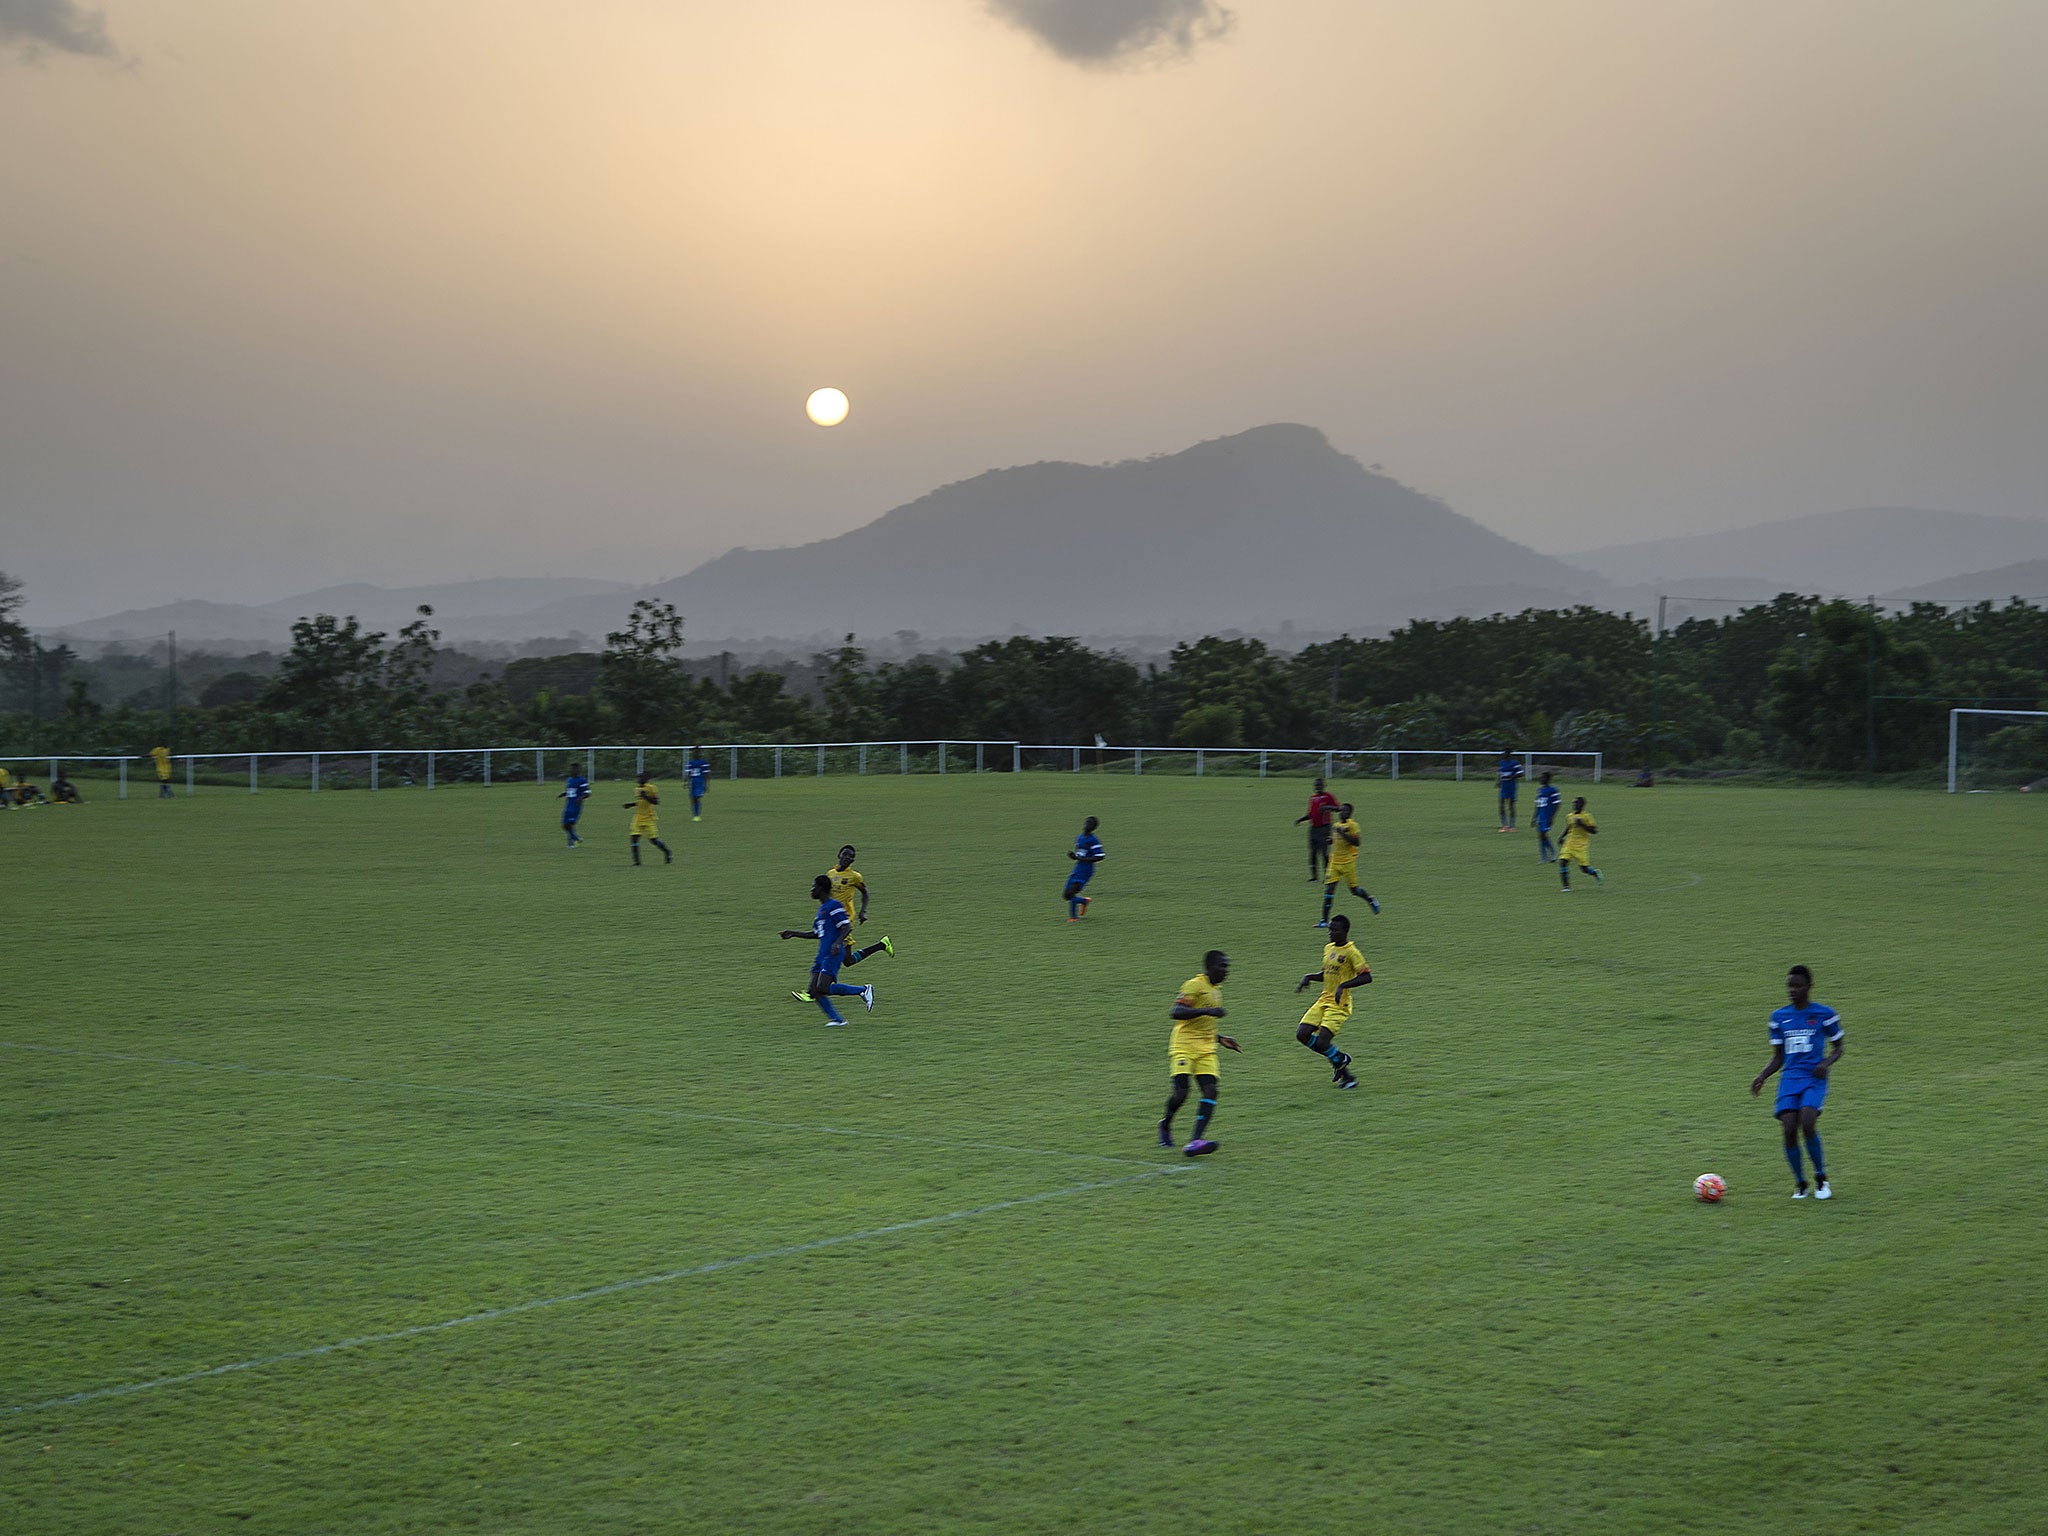 The Right to Dream Football Academy in Ghana